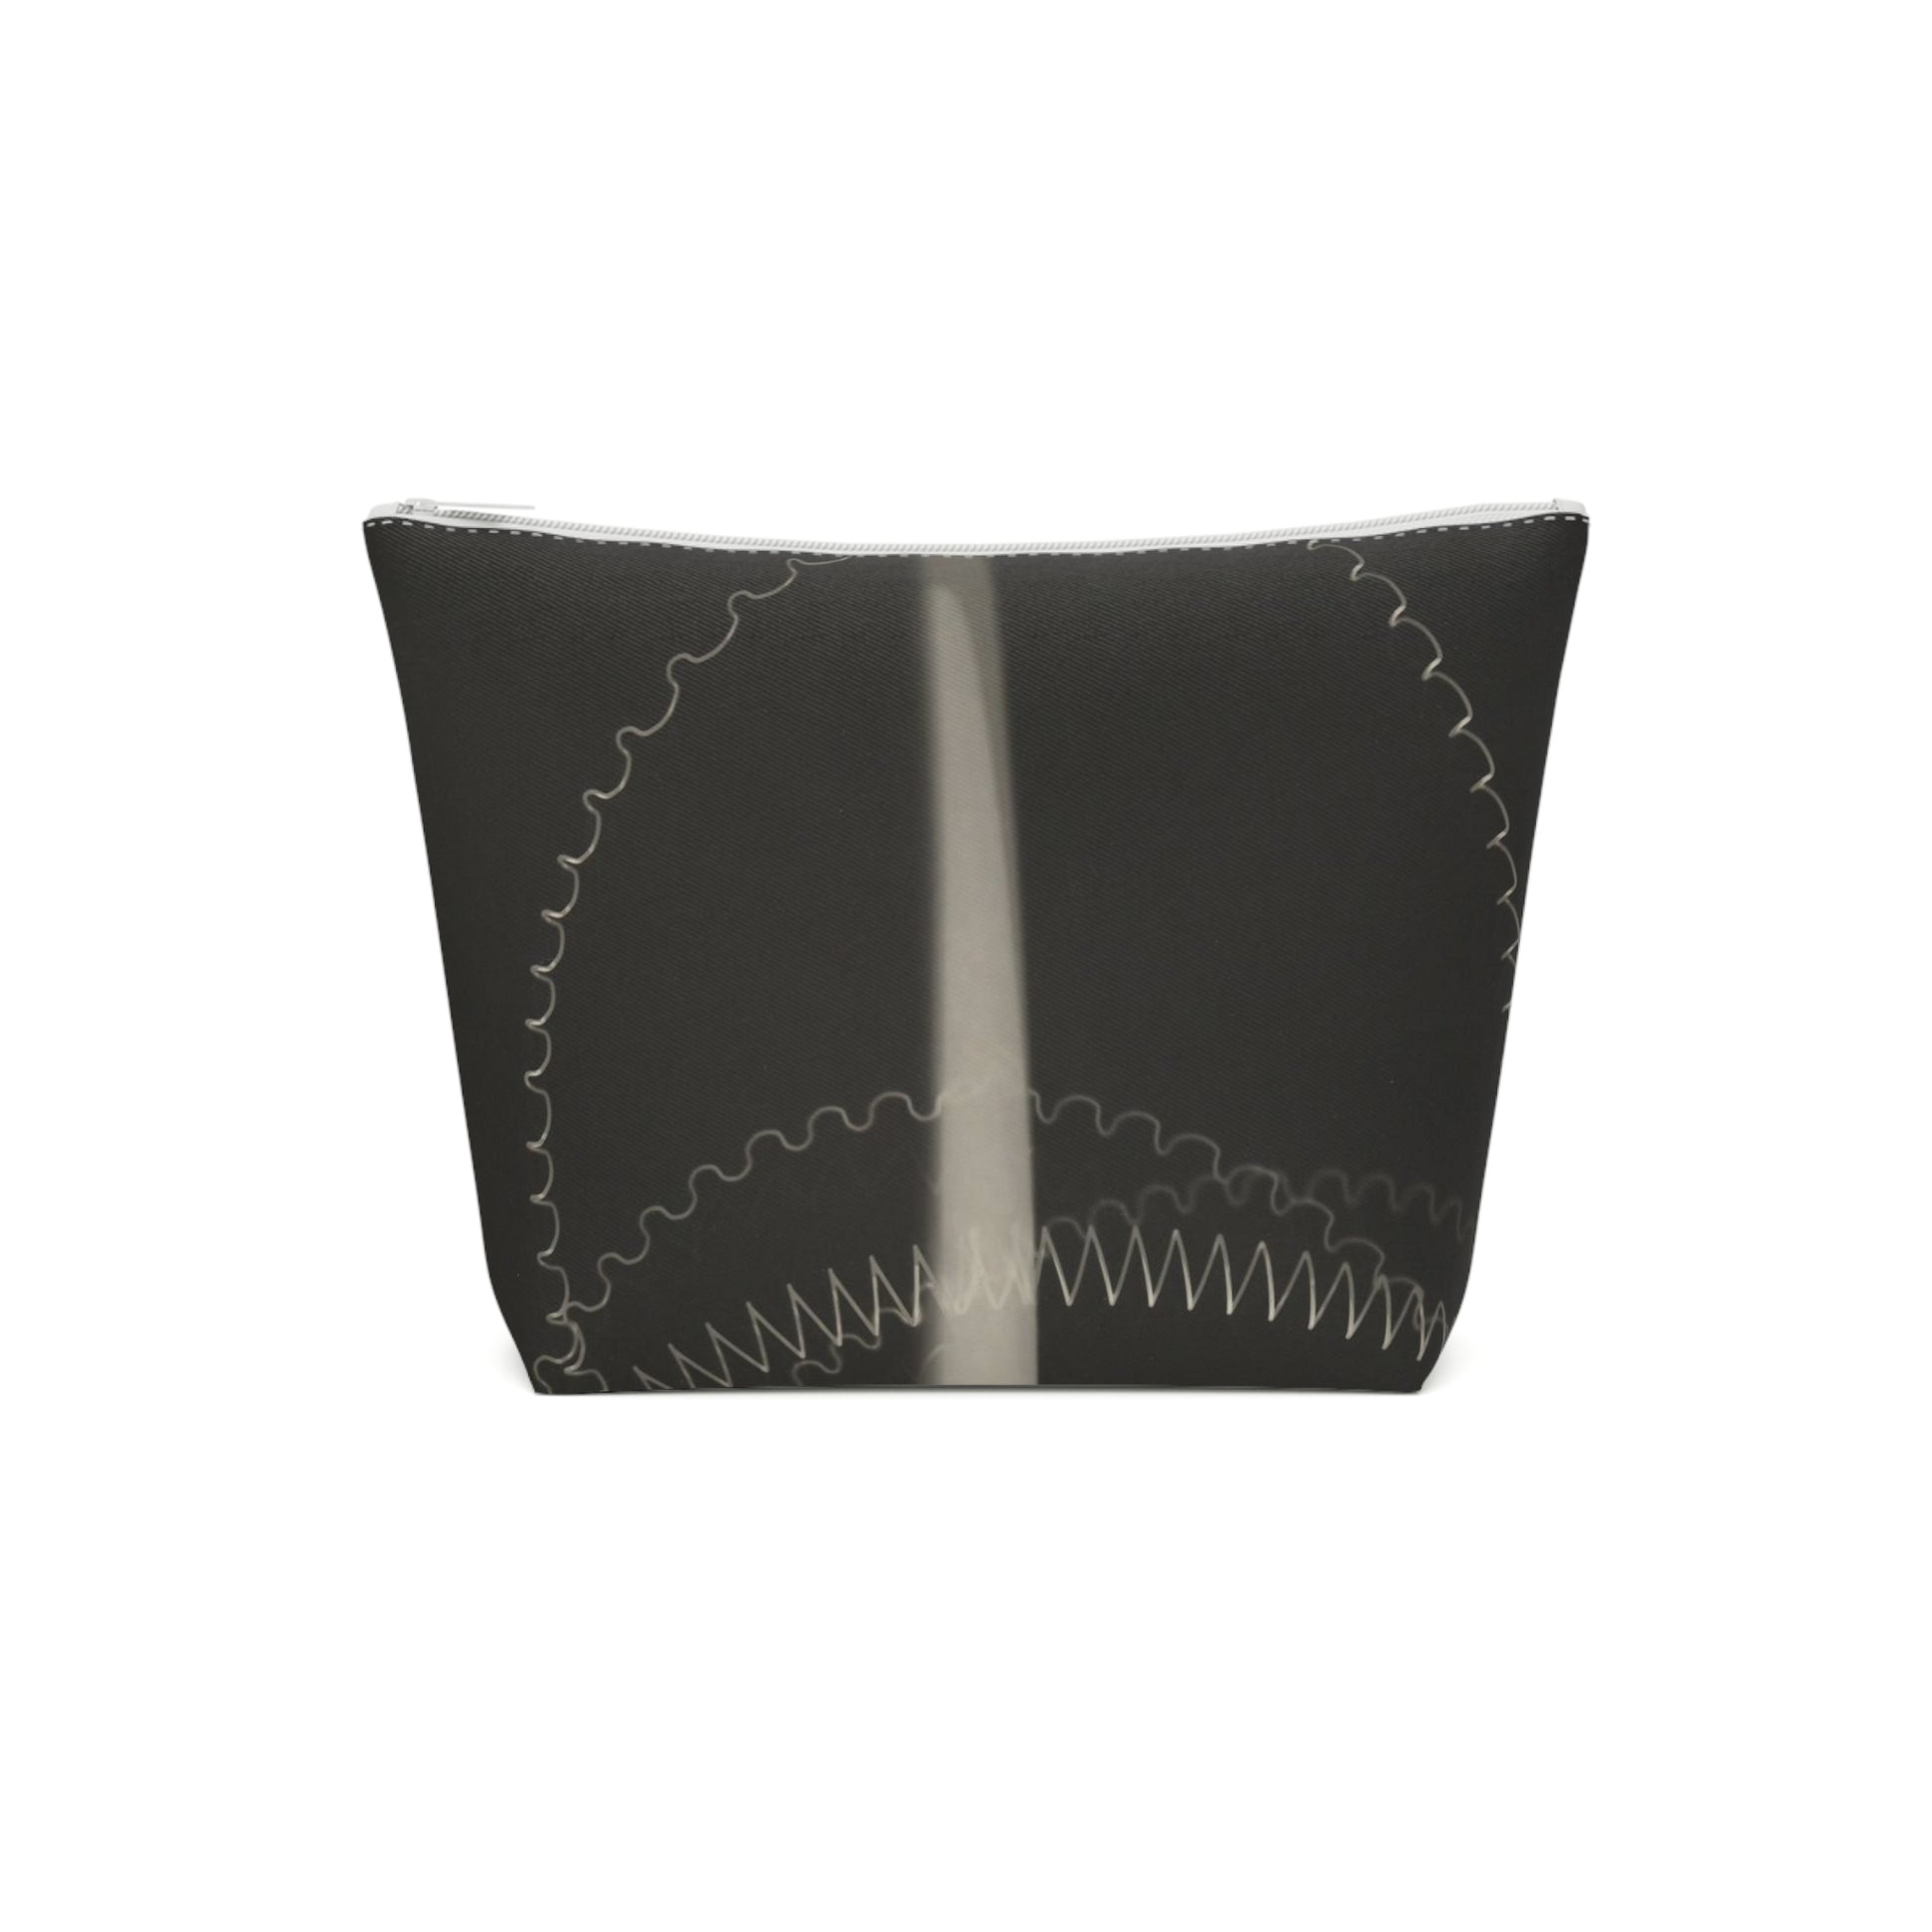 MAN RAY - THE FEATHER - Cotton Cosmetic Bag